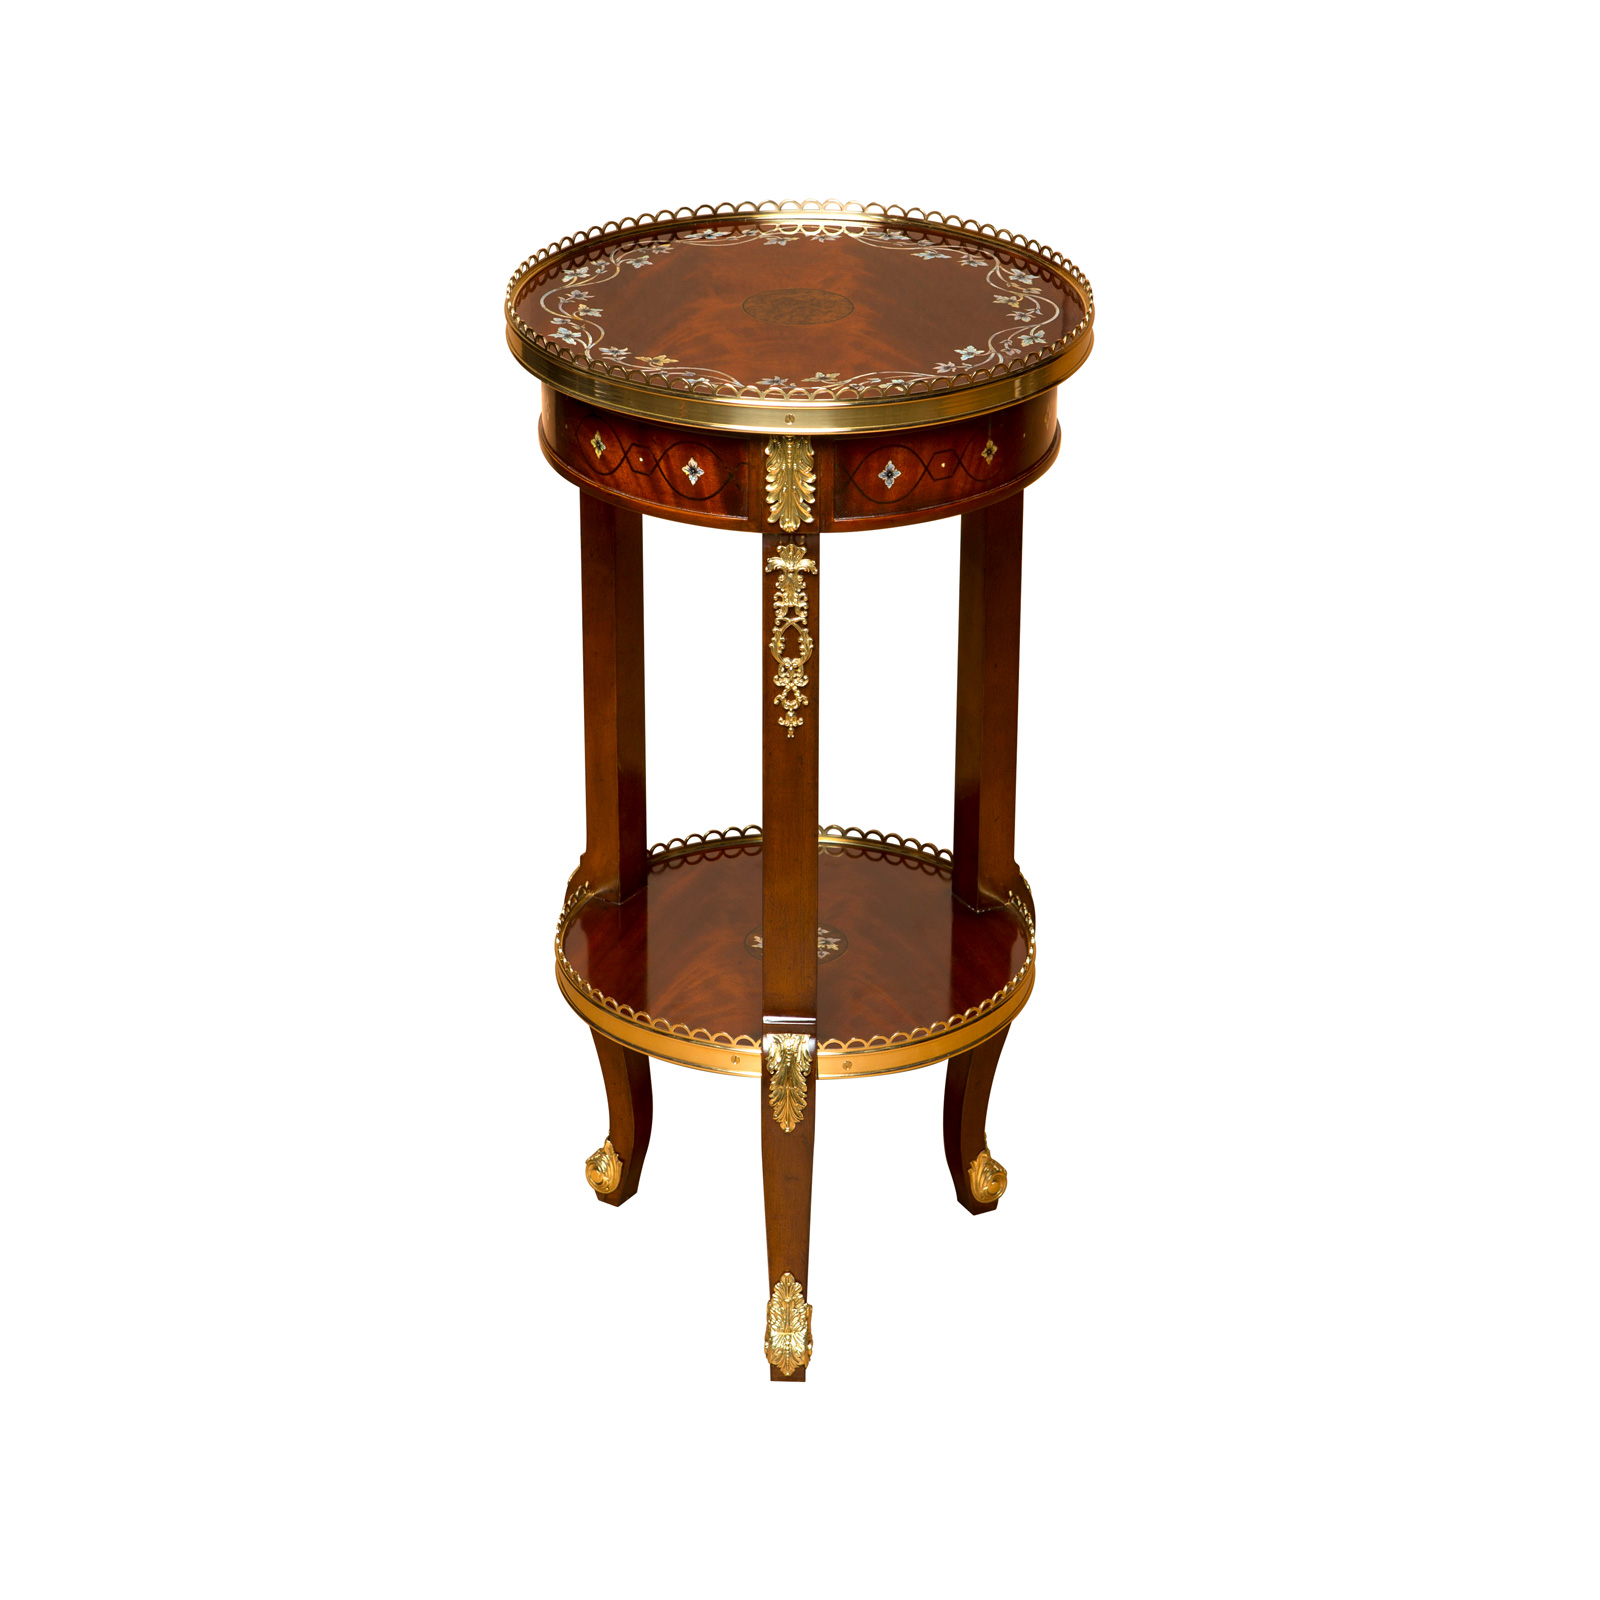 Solid brass embellishments and gallery are the finishing touches on this delicately designed heirloom side table. Authentic Mother of Pearl inlay is a standard in our high end luxury furniture.